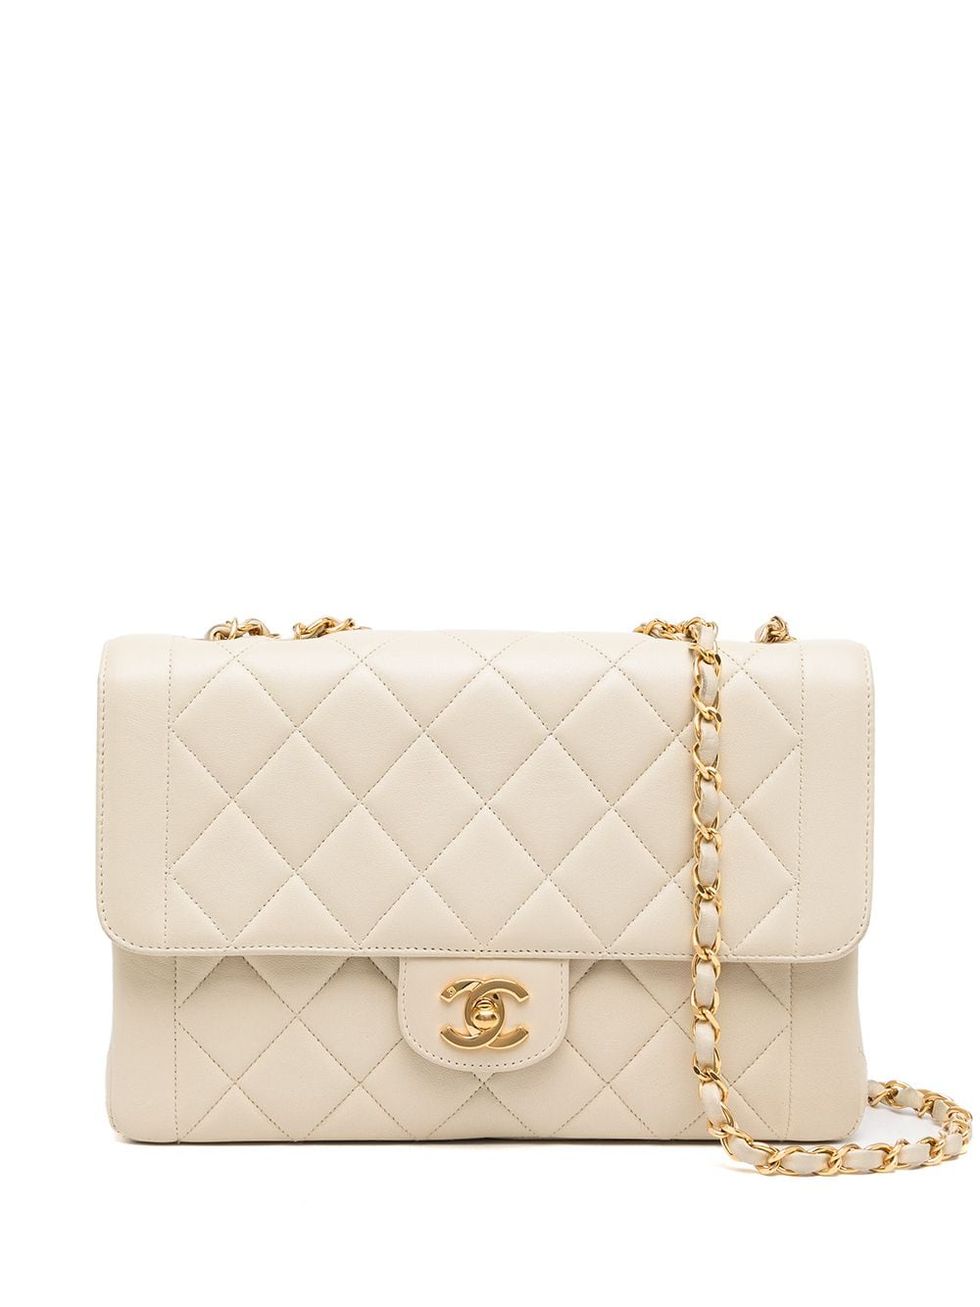 affordable chanel purse